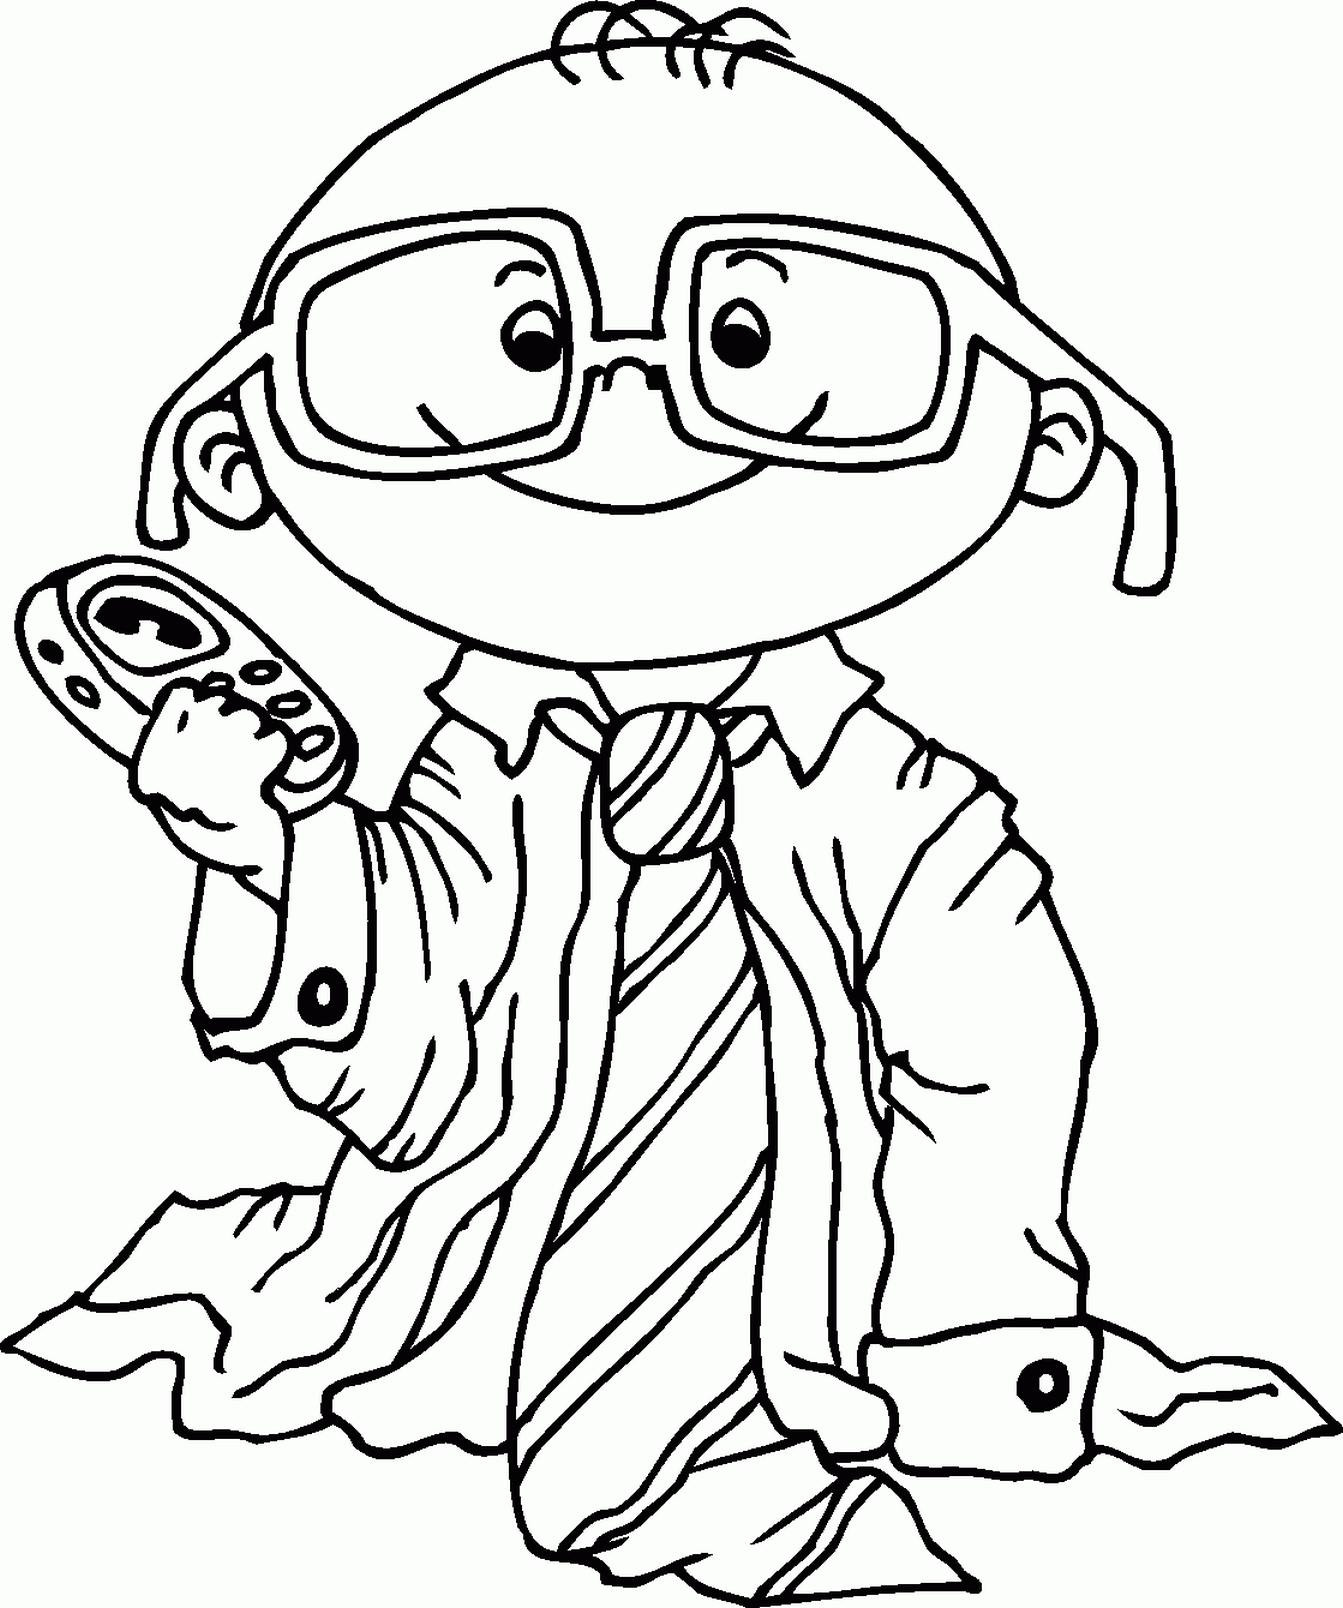 Free Coloring Pages For Boys
 37 Coloring Pages for Teenagers to Print for Free